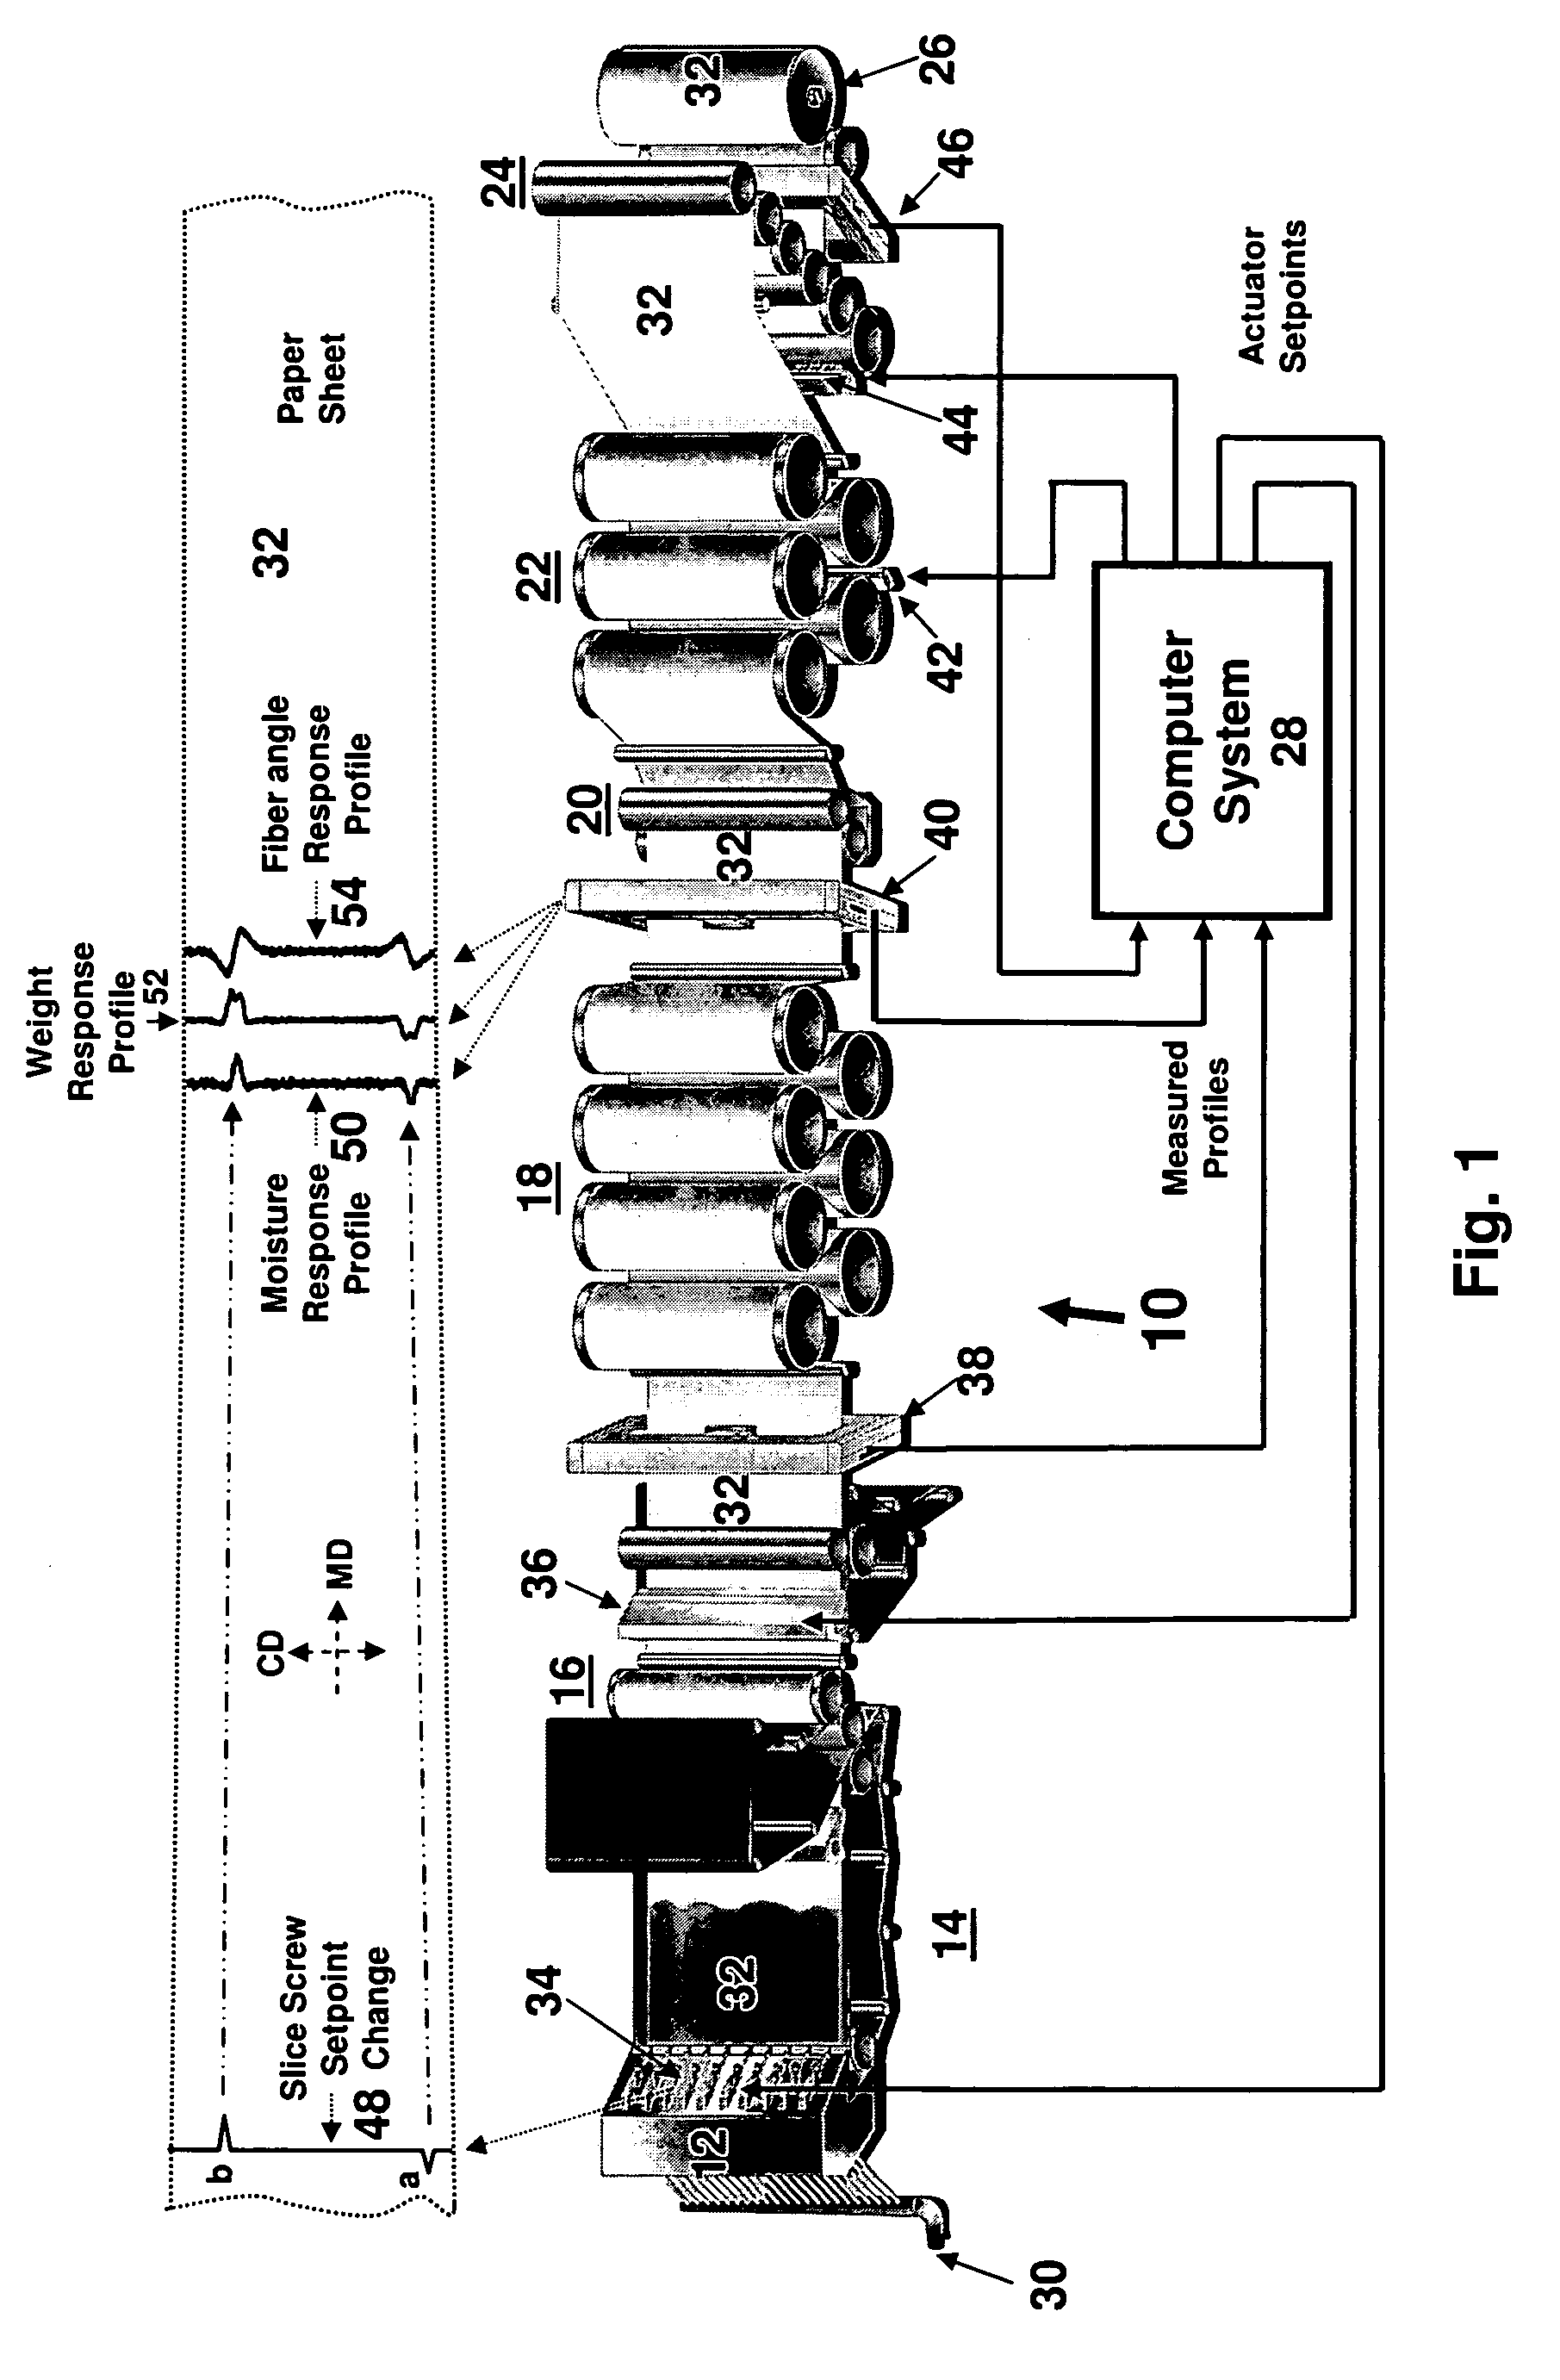 Method and apparatus for creating a generalized response model for a sheet forming machine